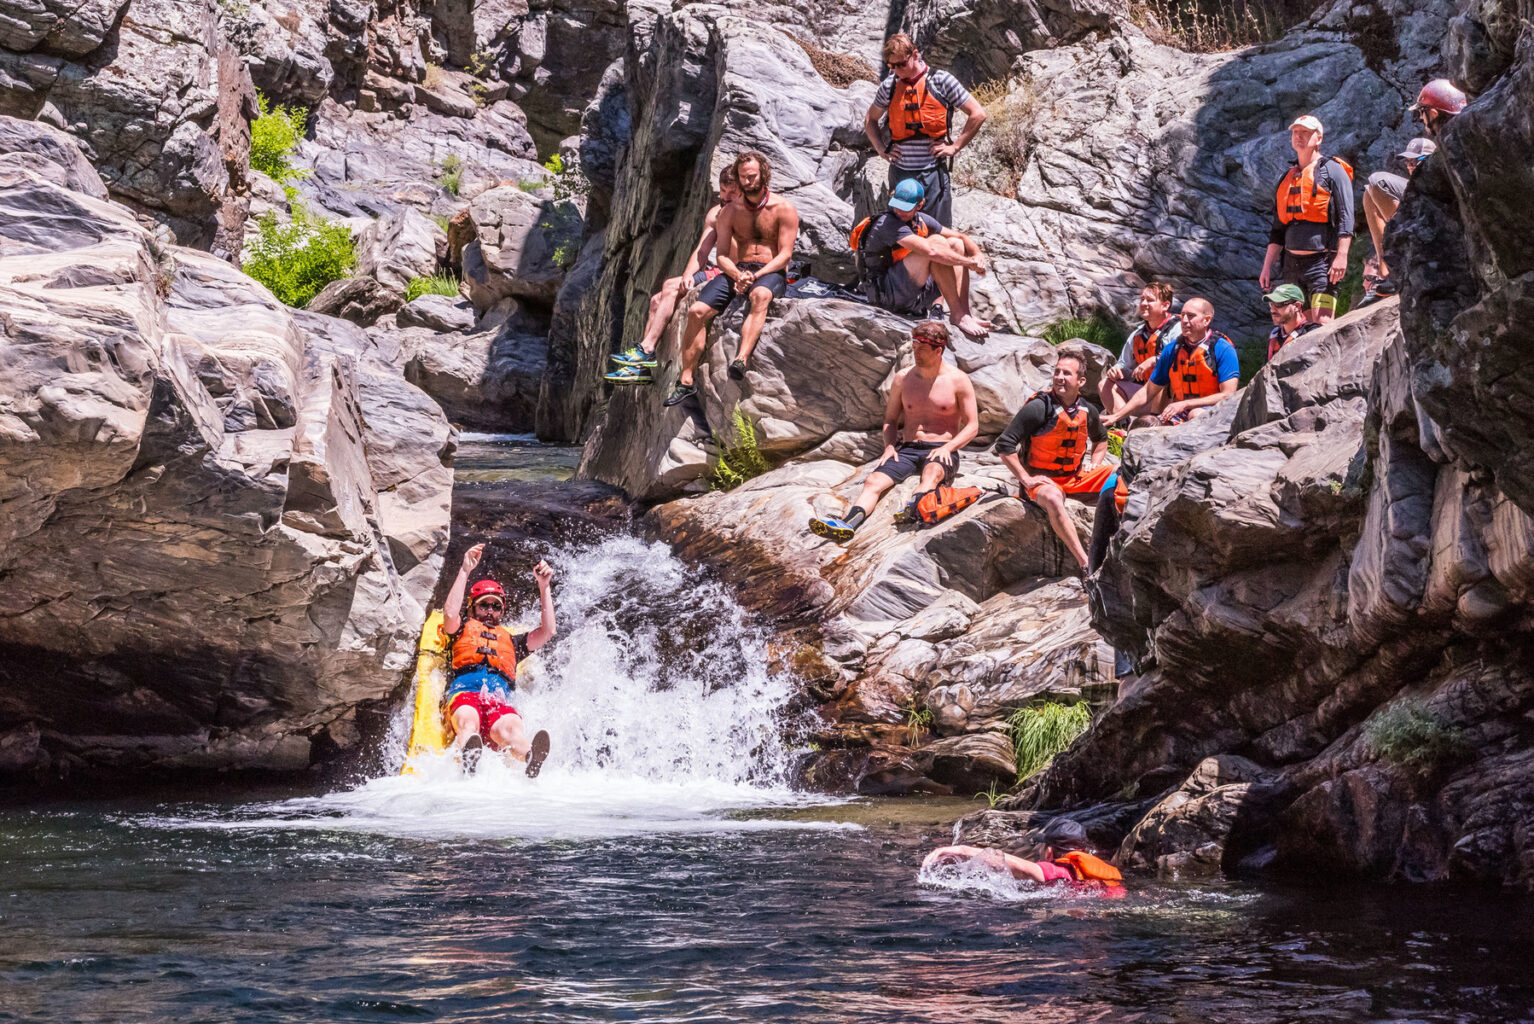 A man going down a natural waterslide while a group of men sit on the rocks and watch.